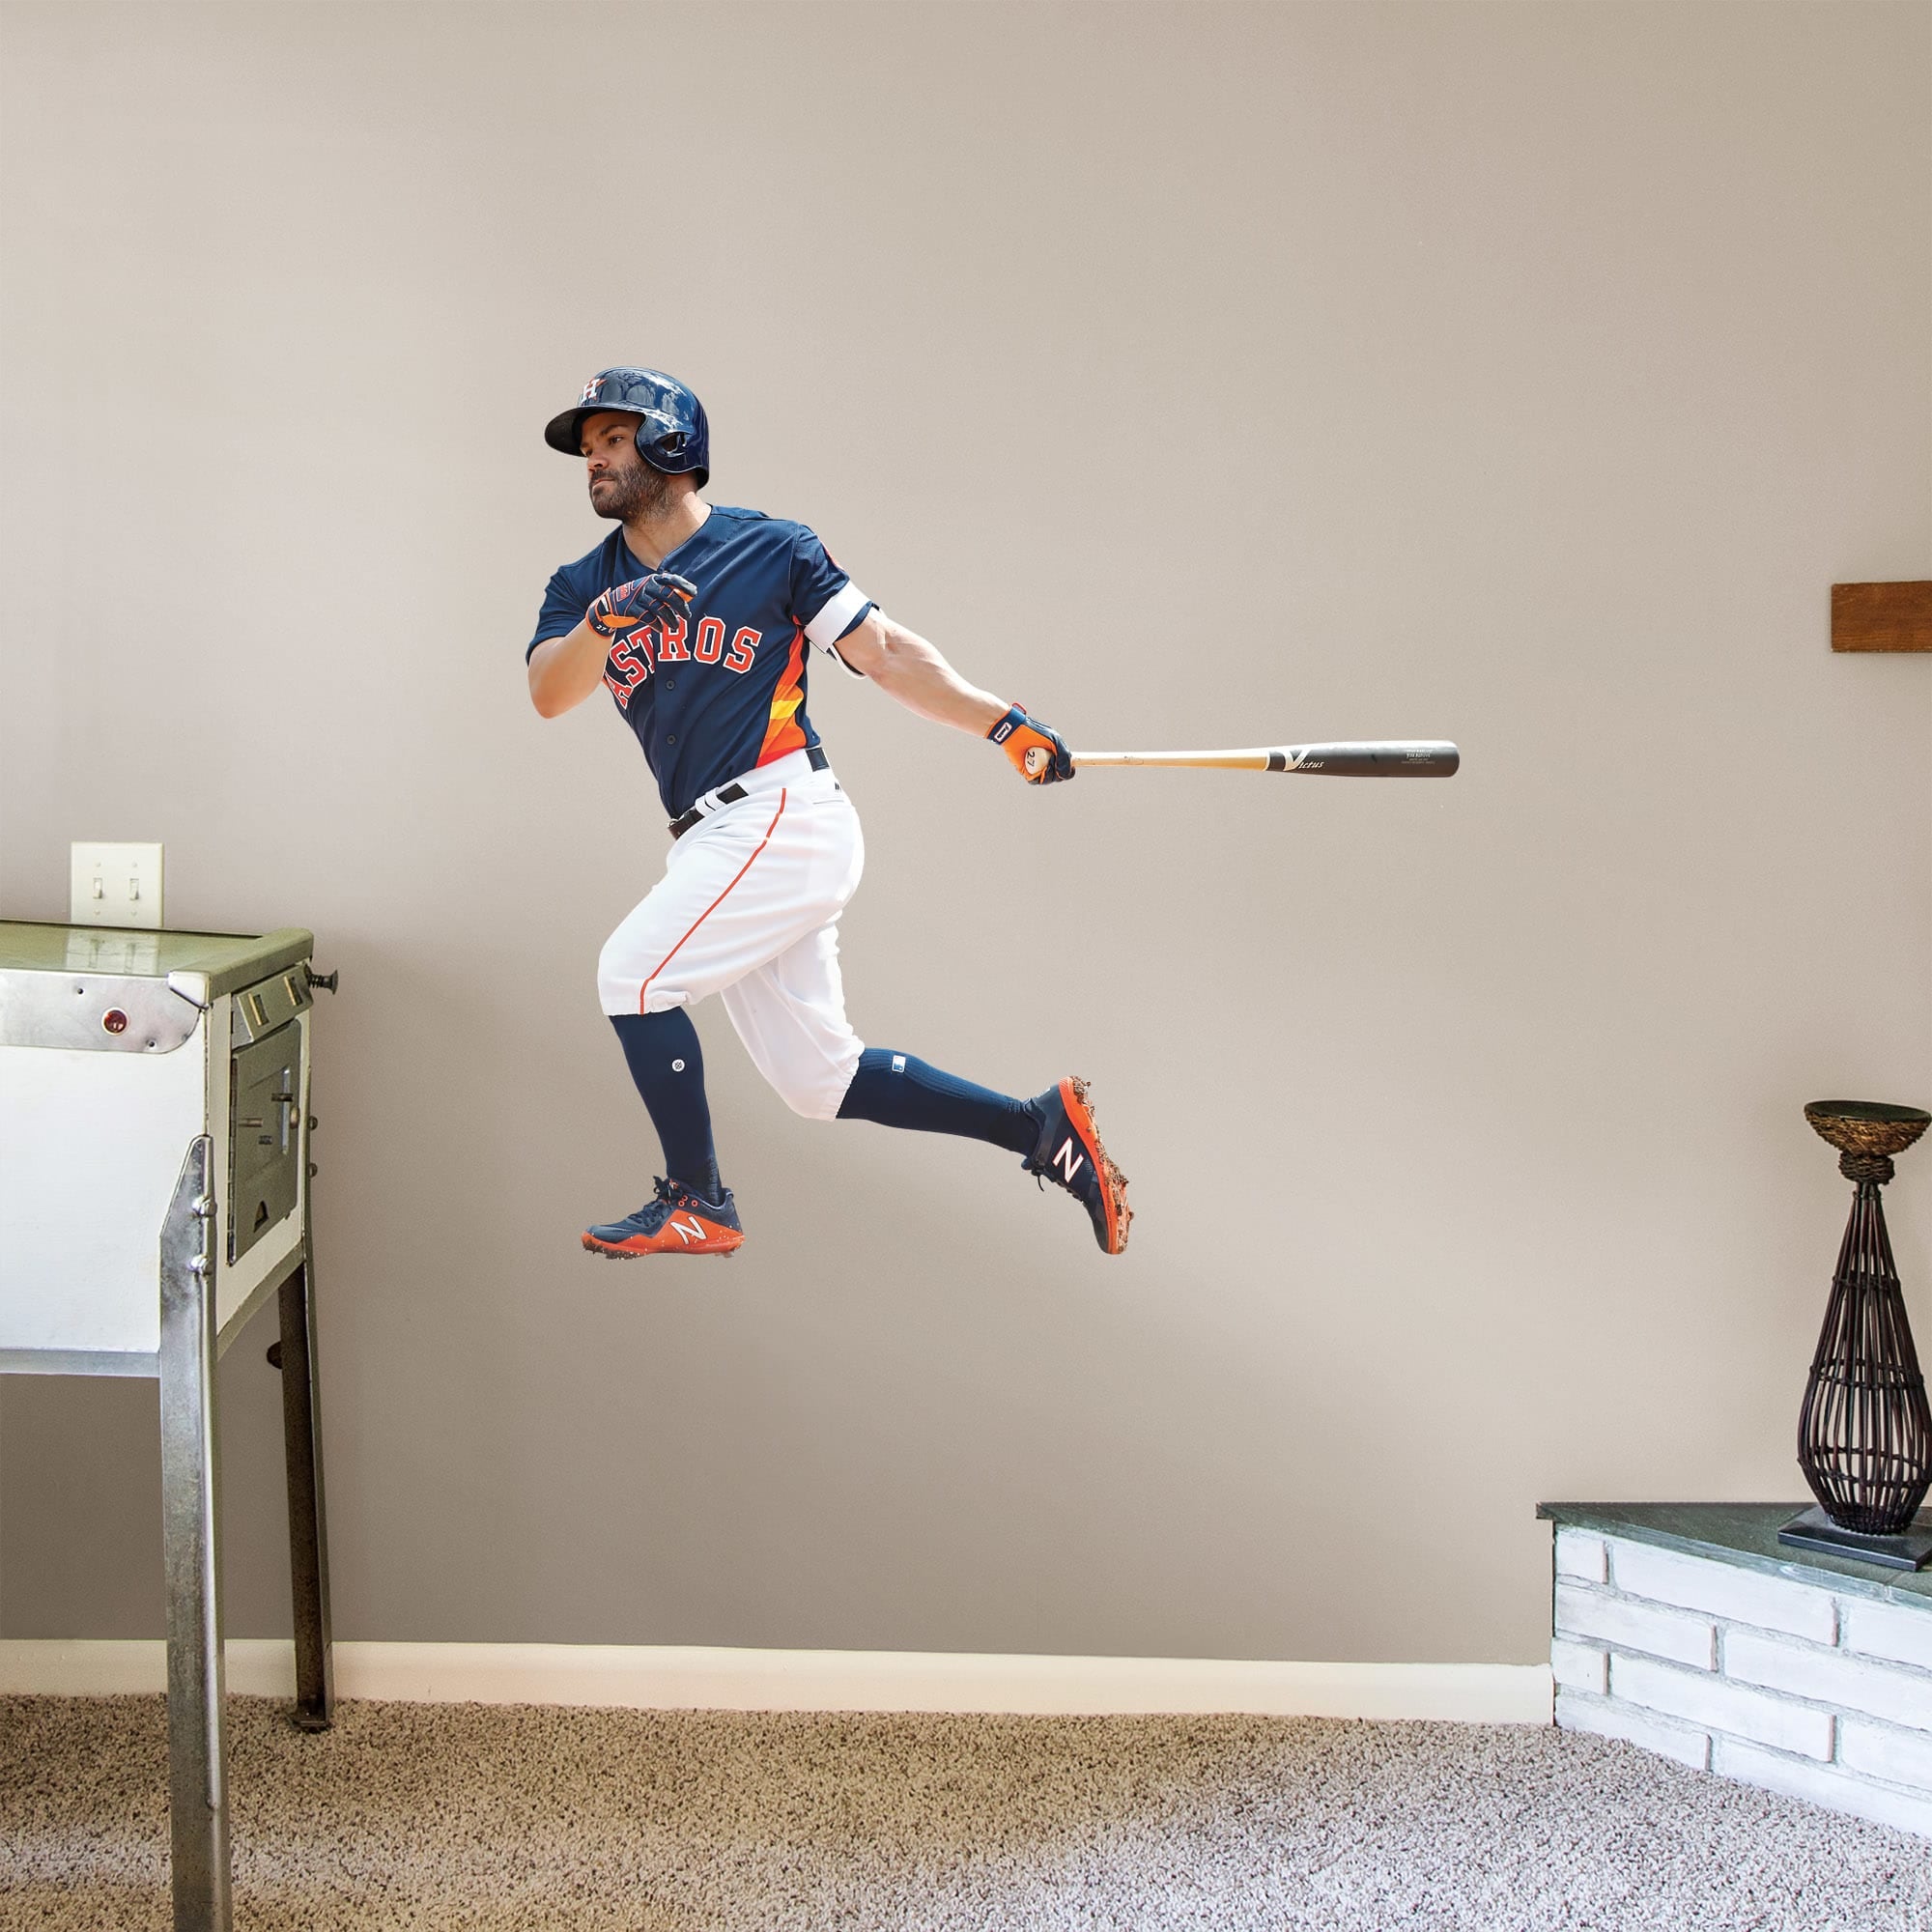 Jose Altuve for Houston Astros - Officially Licensed MLB Removable Wall Decal Giant Athlete + 2 Decals (49"W x 47"H) by Fathead